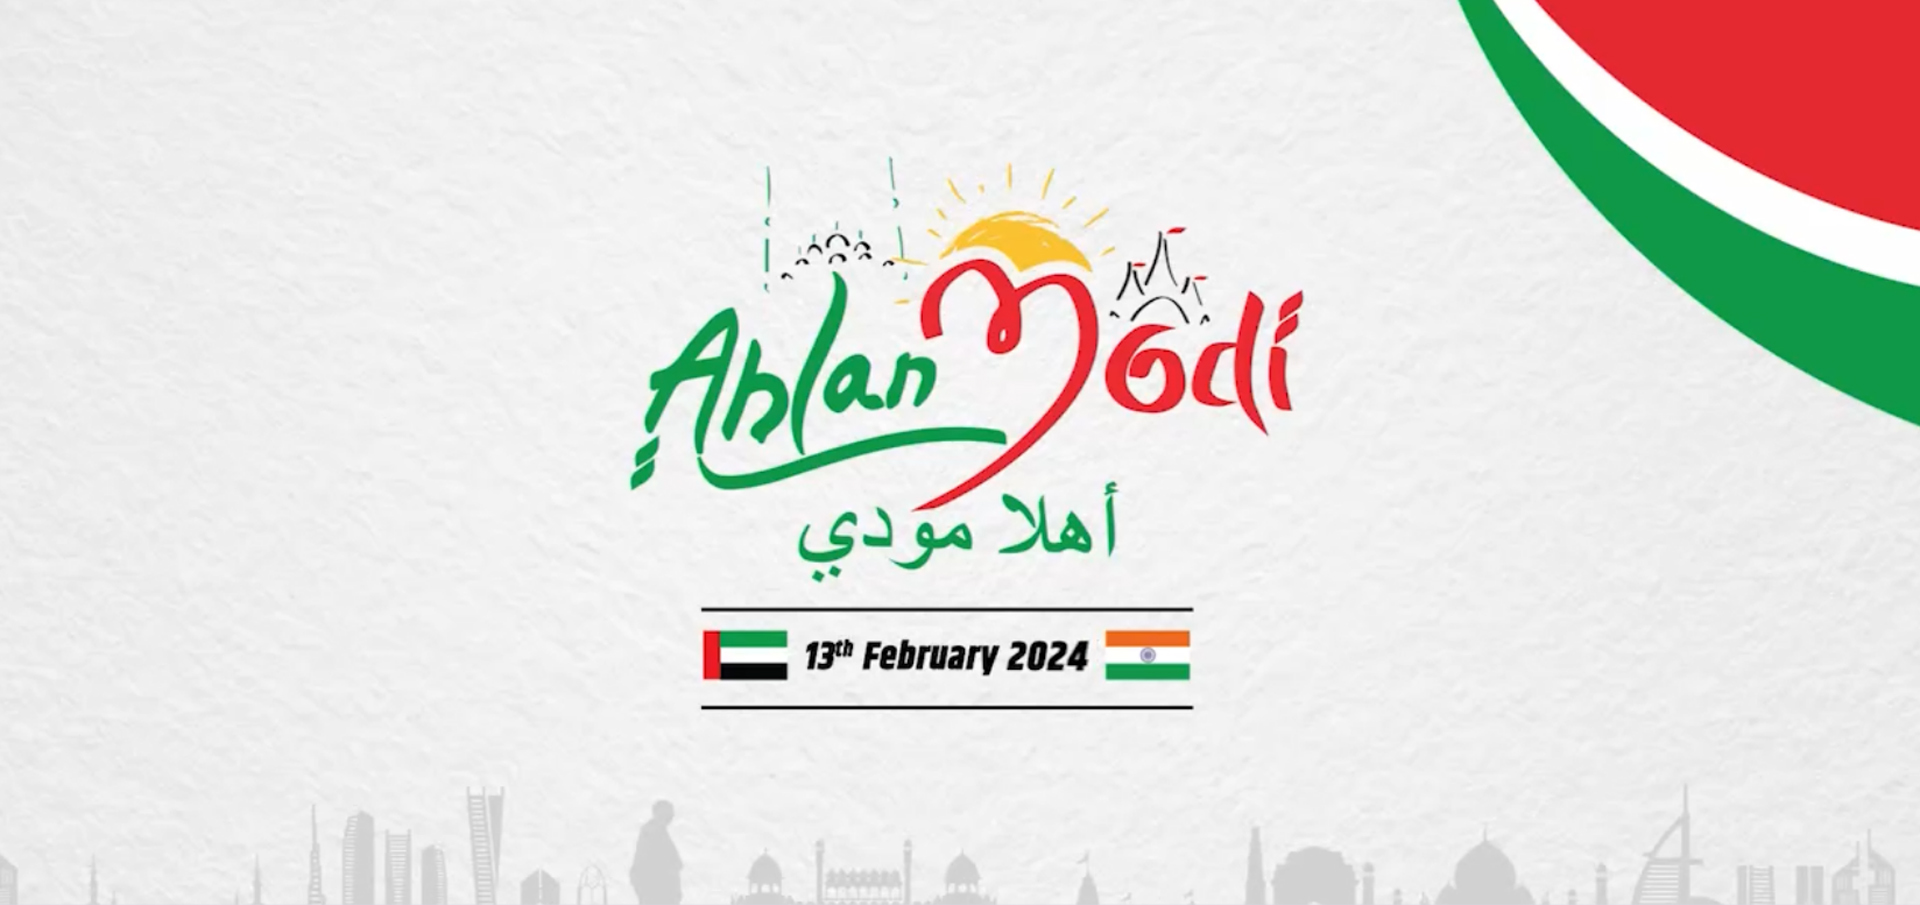 Get Ready for the Spectacle: Ahlan Modi! An Unforgettable Gathering of 65,000 Guests, 700 Performers, and 1,500 Volunteers in Abu Dhabi!